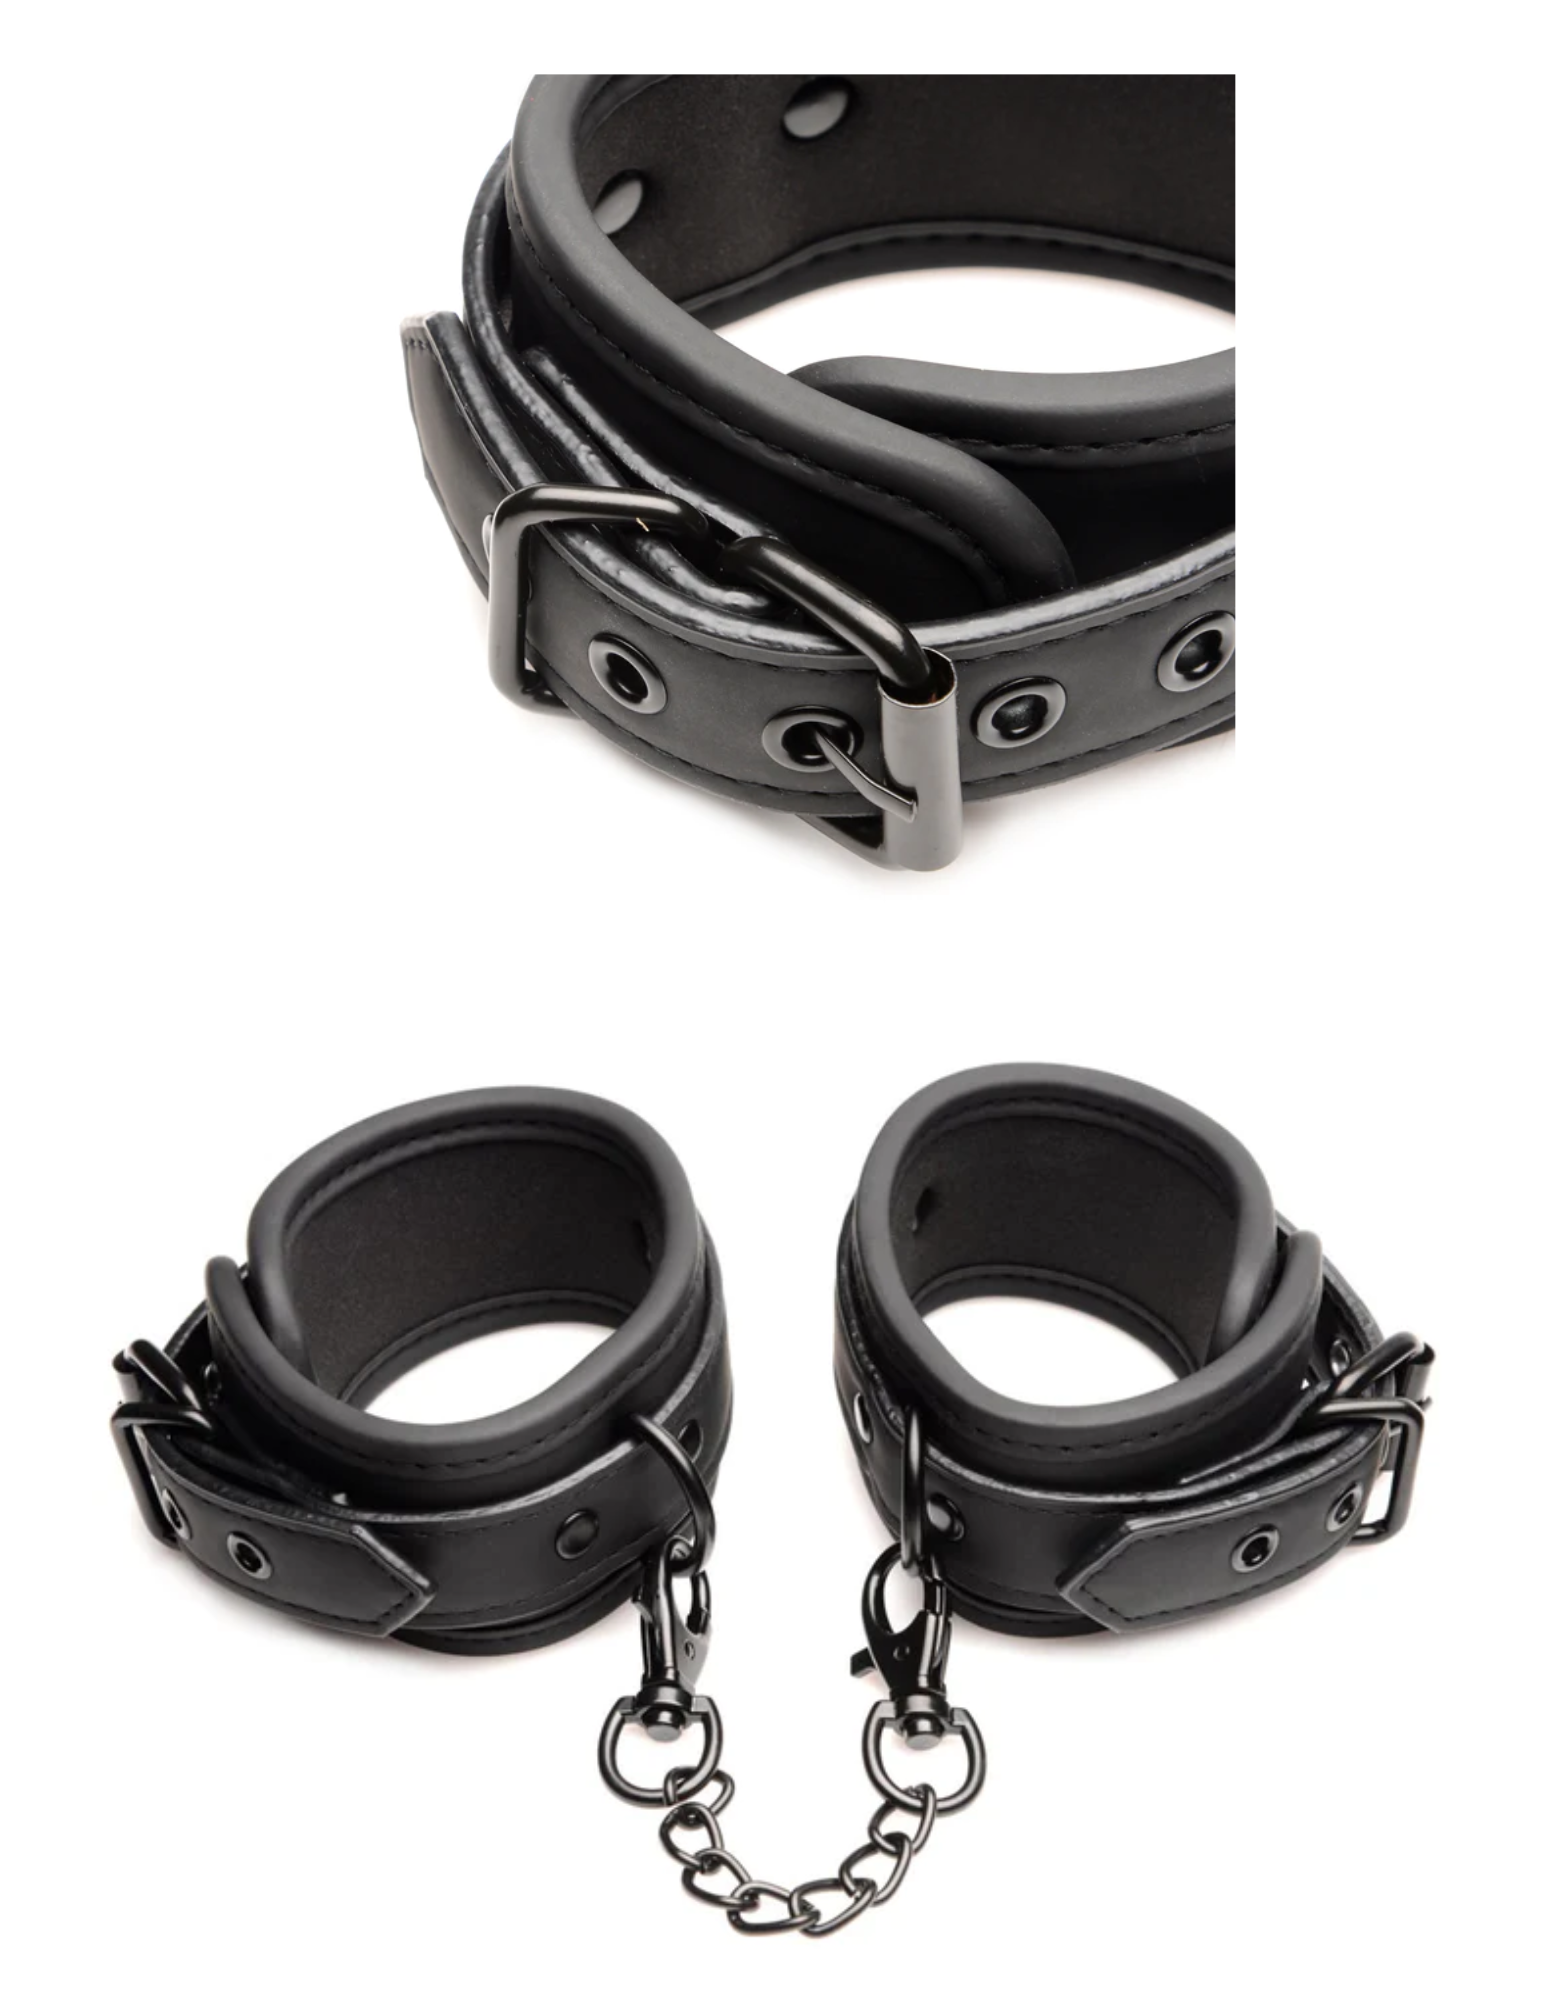 Image features the wrist cuffs and their buckles from the Master of Kink PU Leather Deluxe Bondage Set by Master Series and XR Brands.